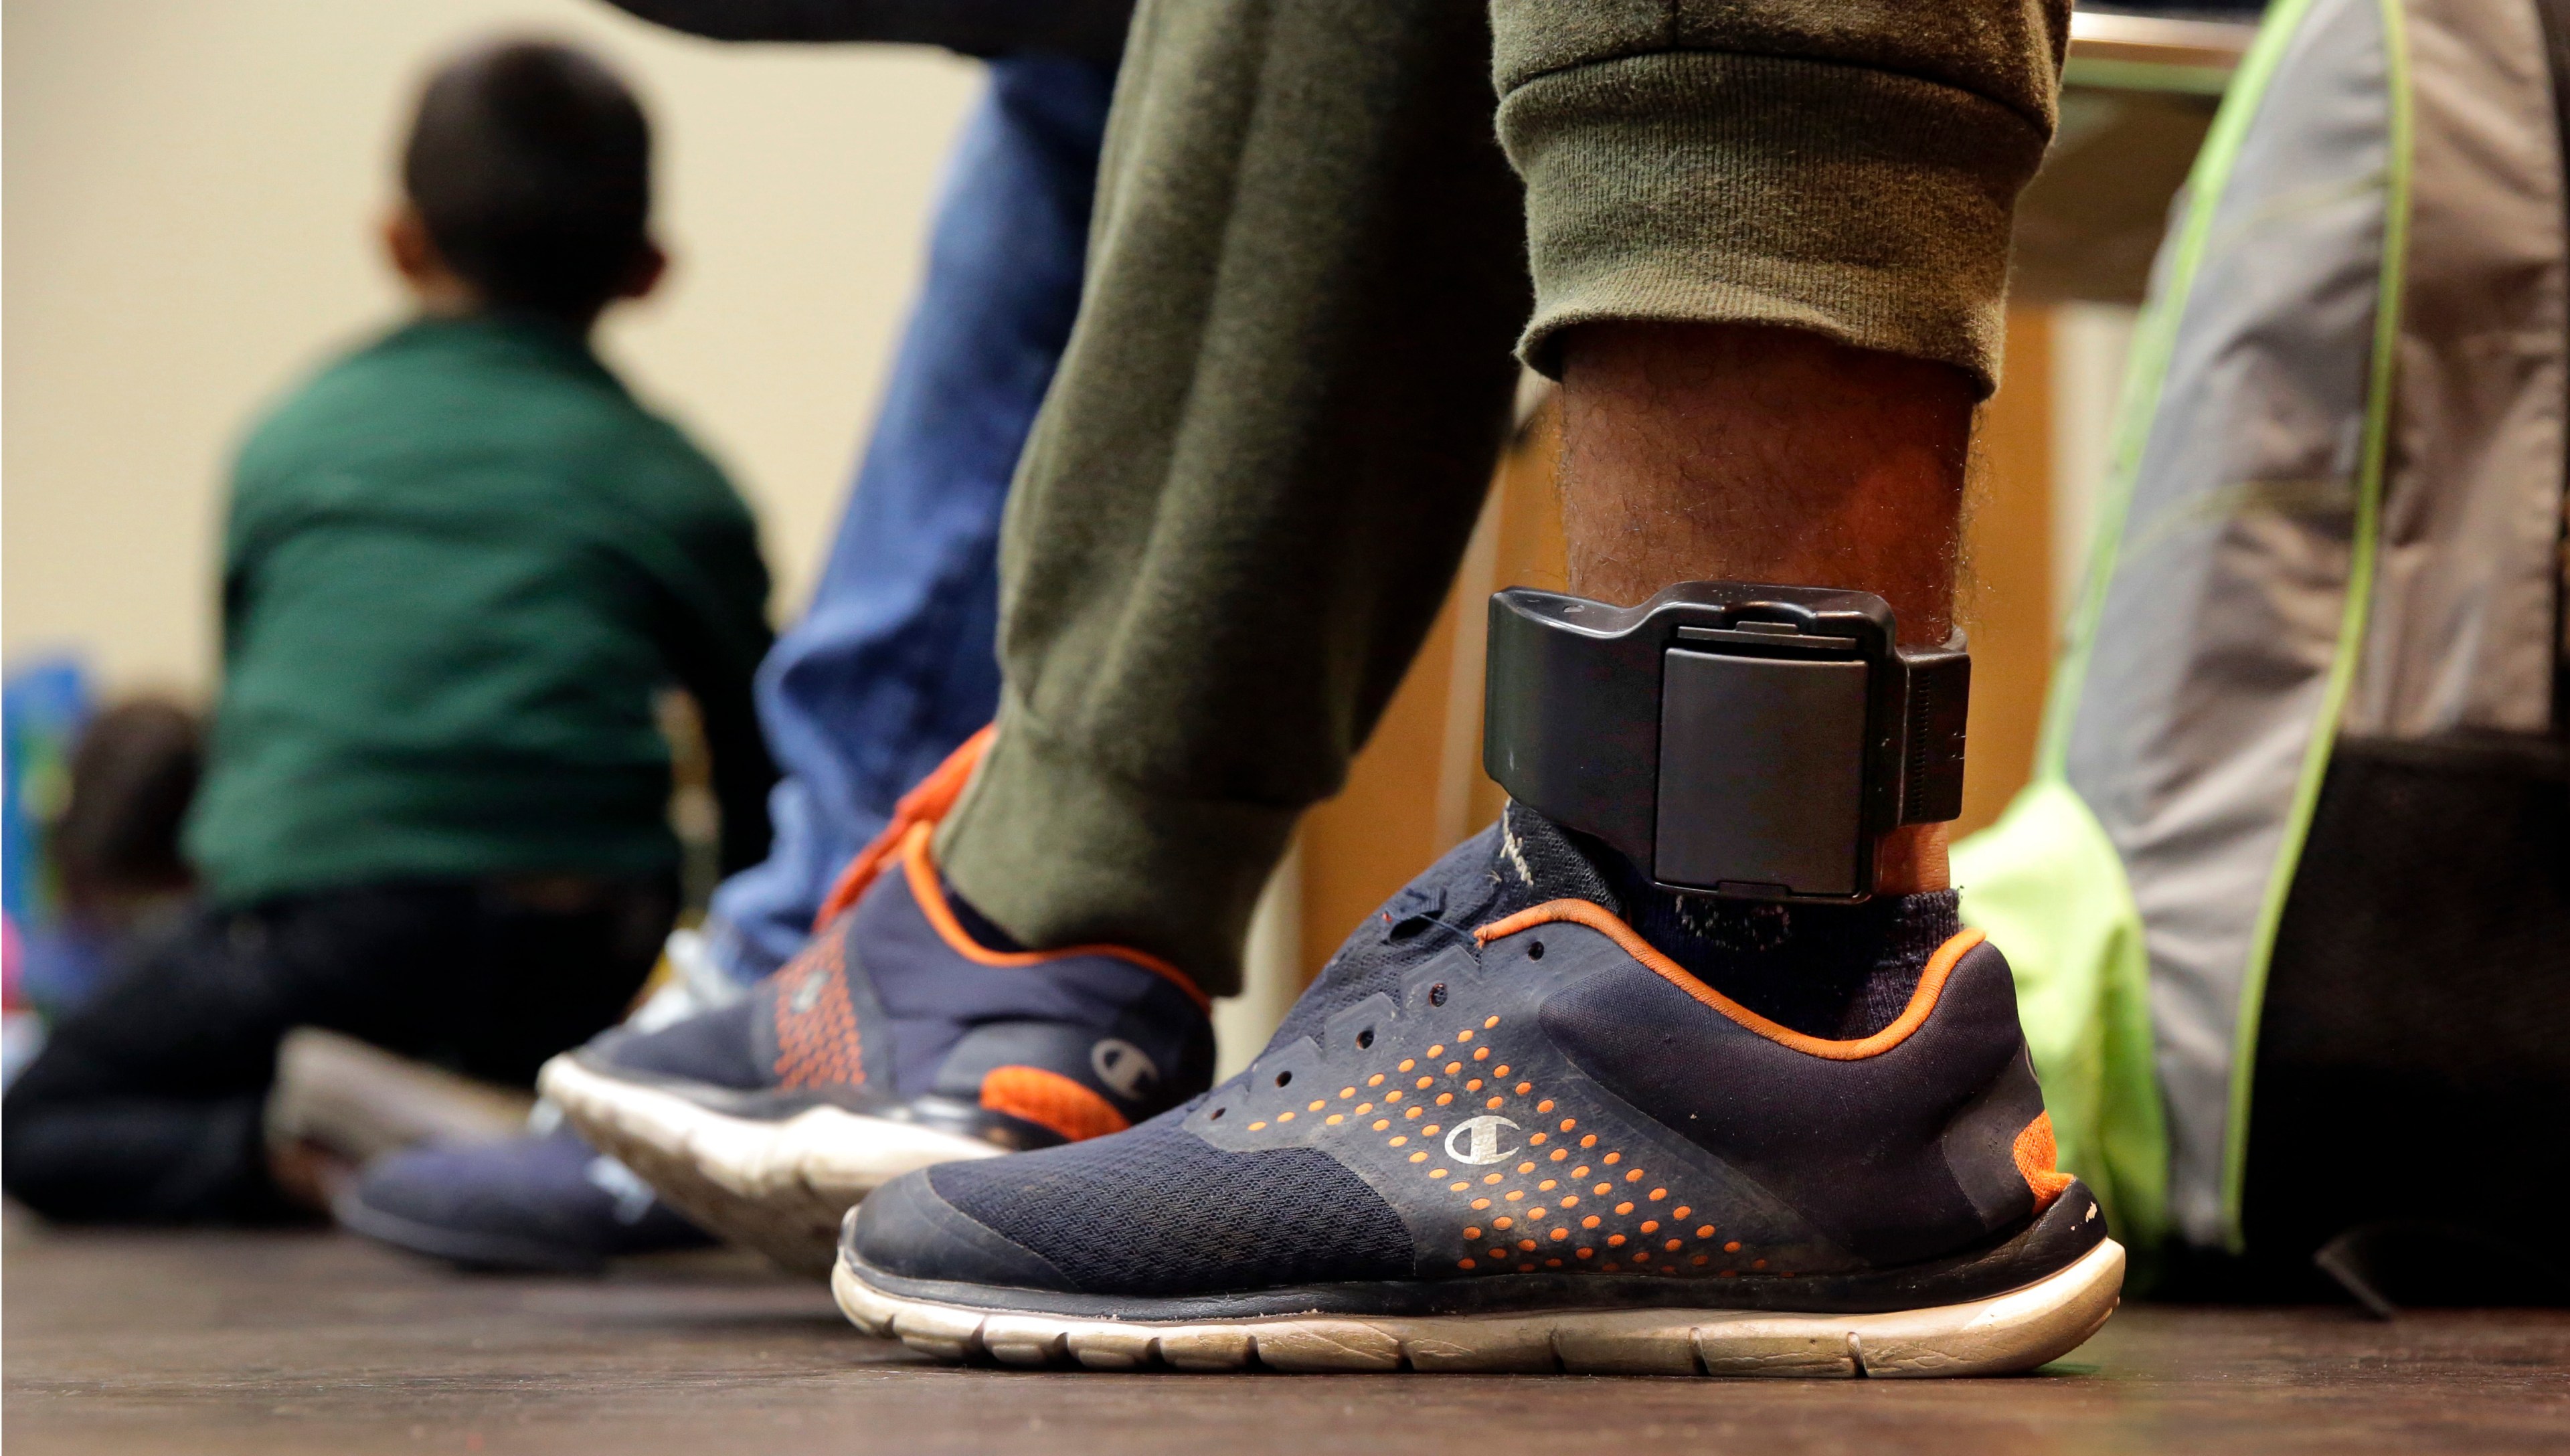 A recent staffing shortage for the San Francisco Sheriff's Office Community Programs unit delayed the preparation of 17 arrest warrants for individuals who cut off their ankle monitors or had repeat violations of the conditions of their release.